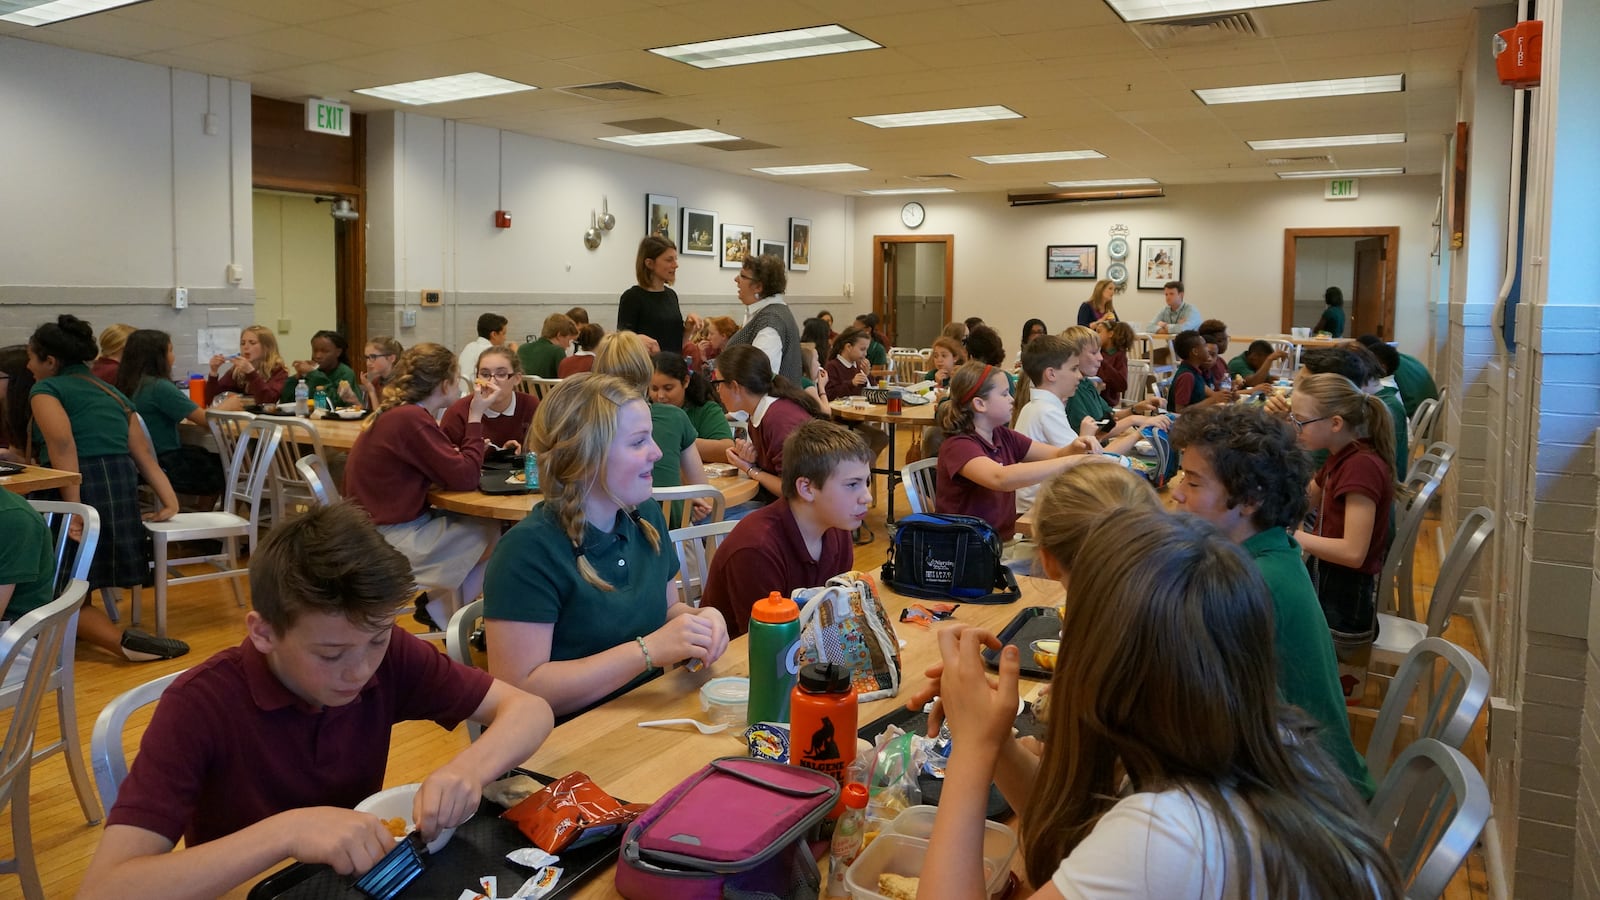 Students eat lunch at the Oaks Academy Middle School, a private Christian school.